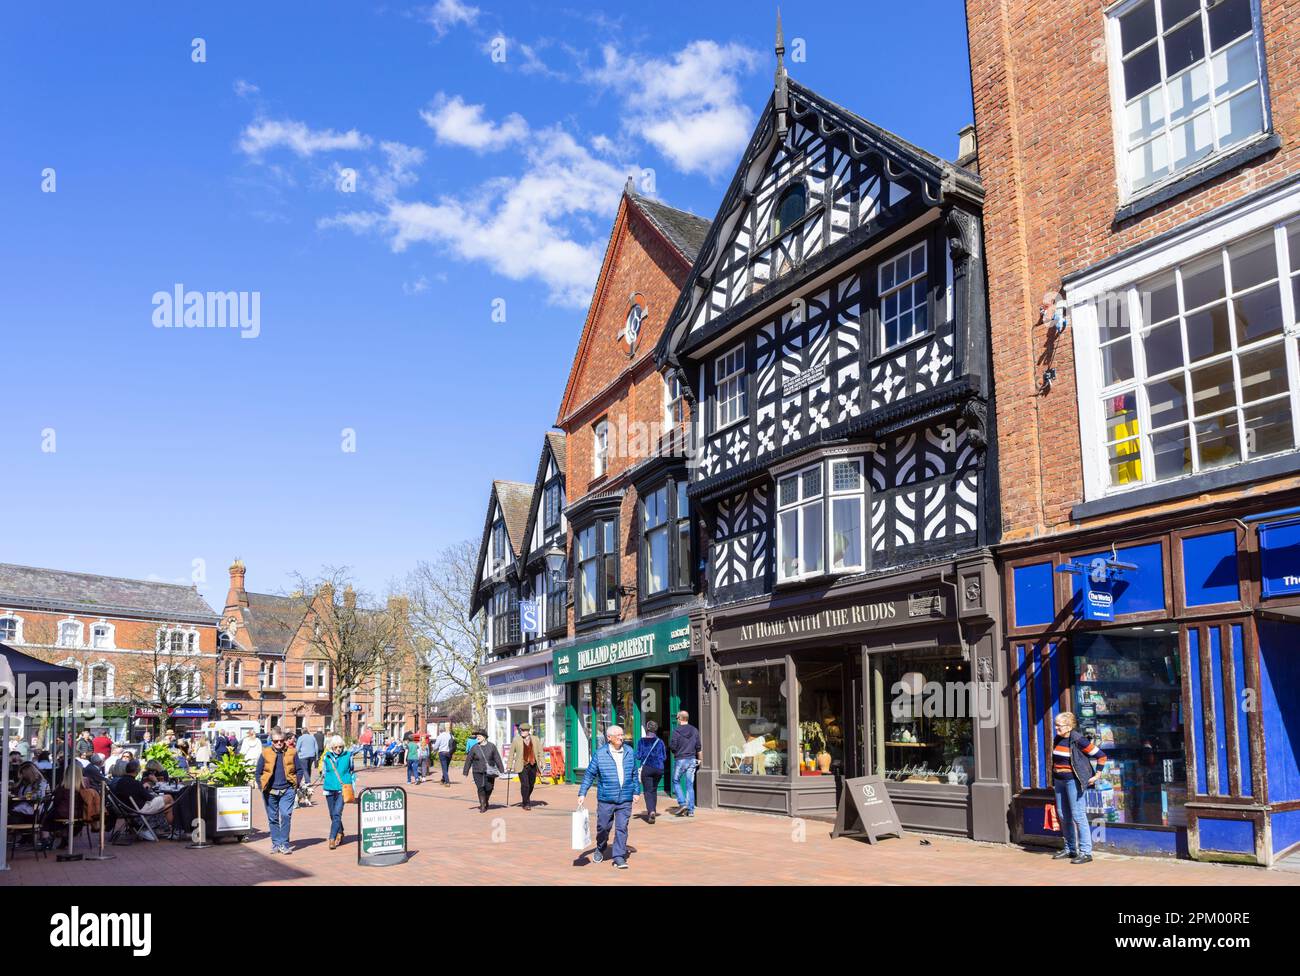 Nantwich Cheshire East - Nantwich high street with half timbered buildings and people shopping Nantwich Cheshire England UK GB Europe Stock Photo